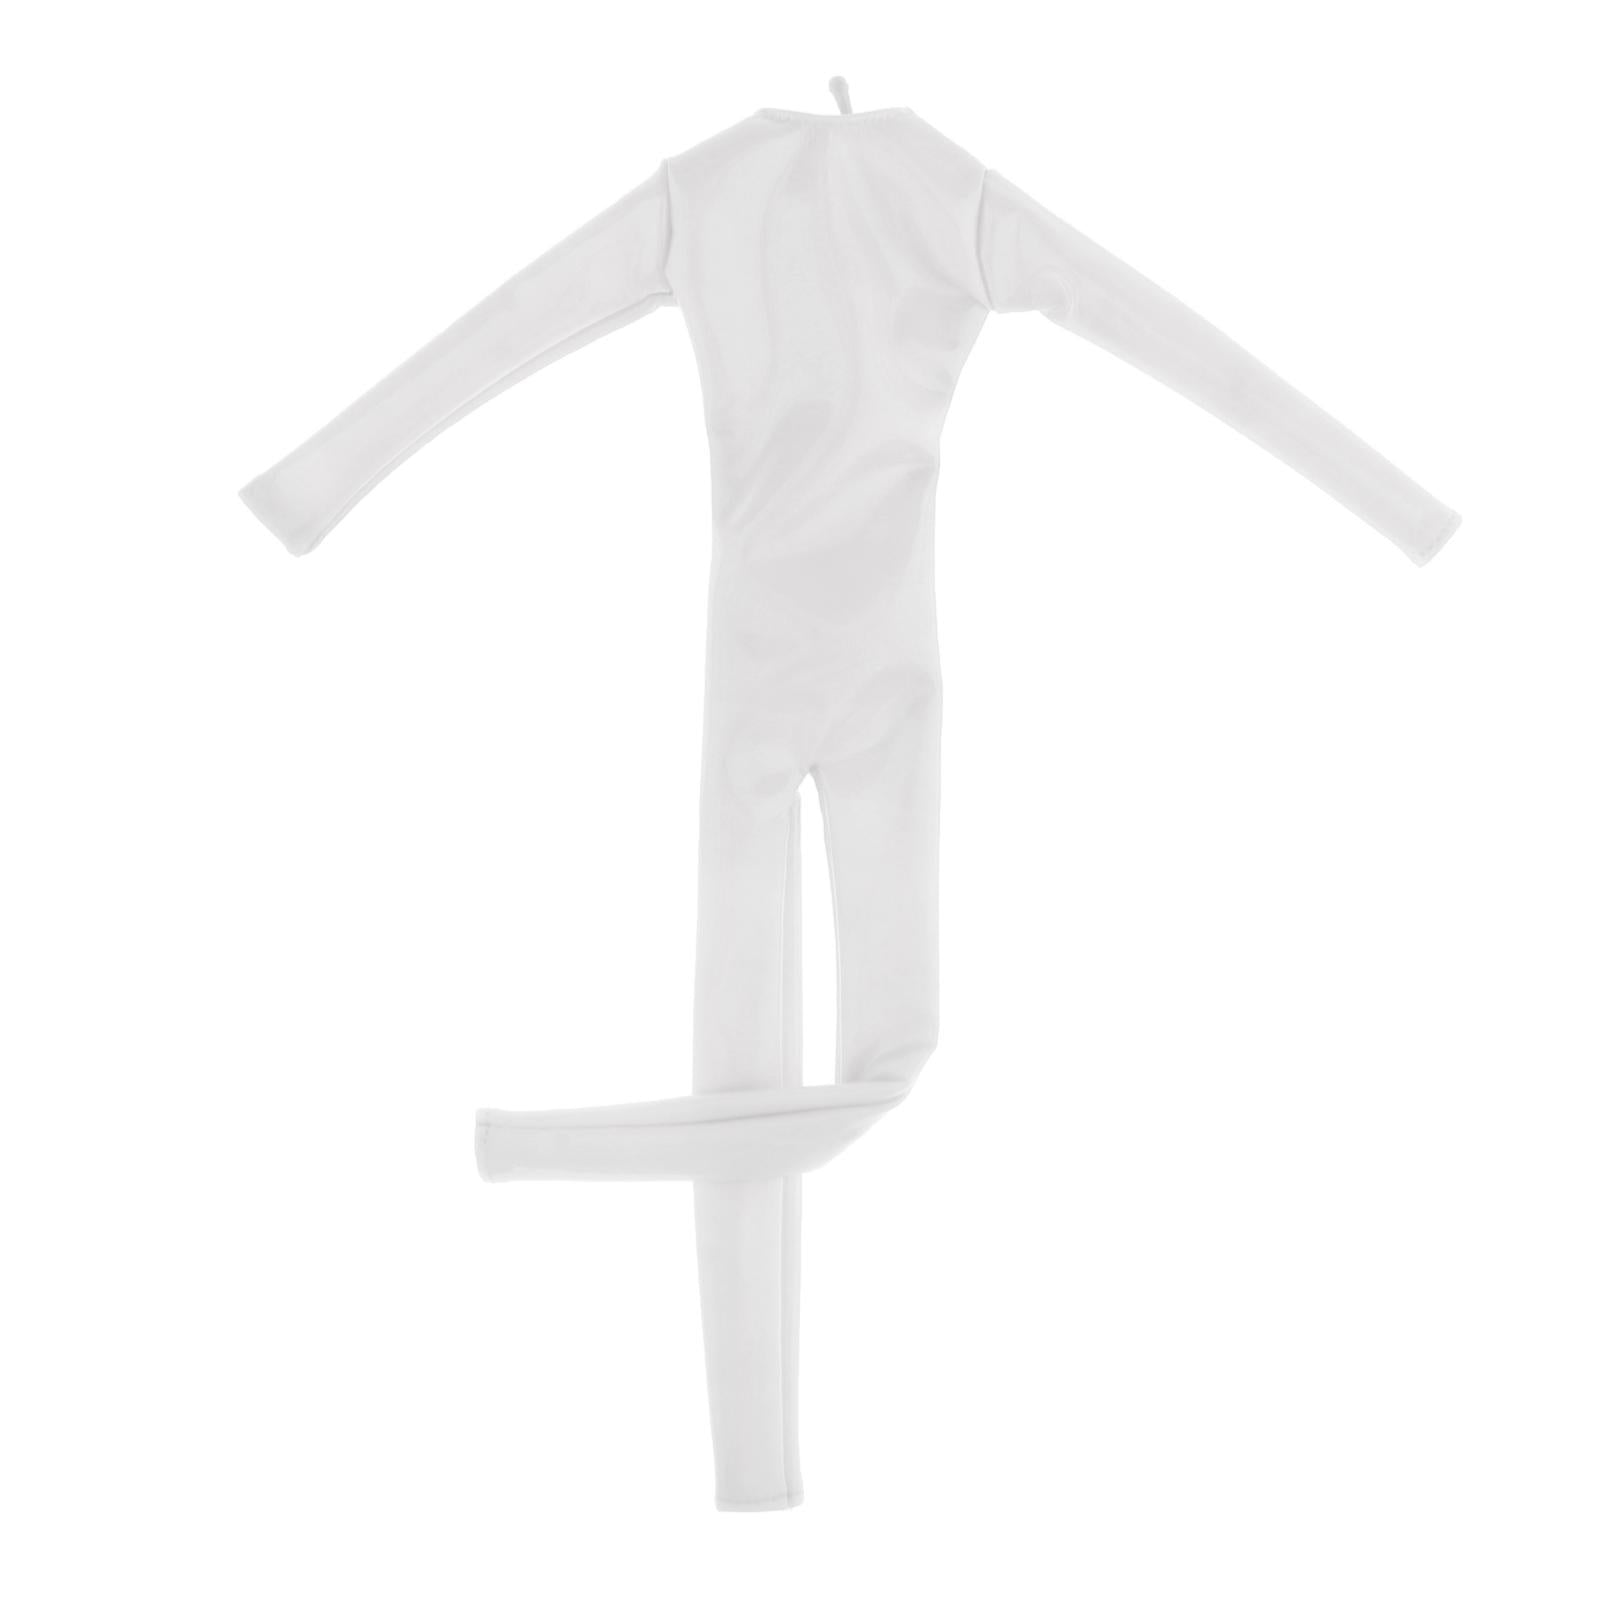 1/6 Long Sleeve Tight Fitting Clothes for 12" DID Figures Accs PU White